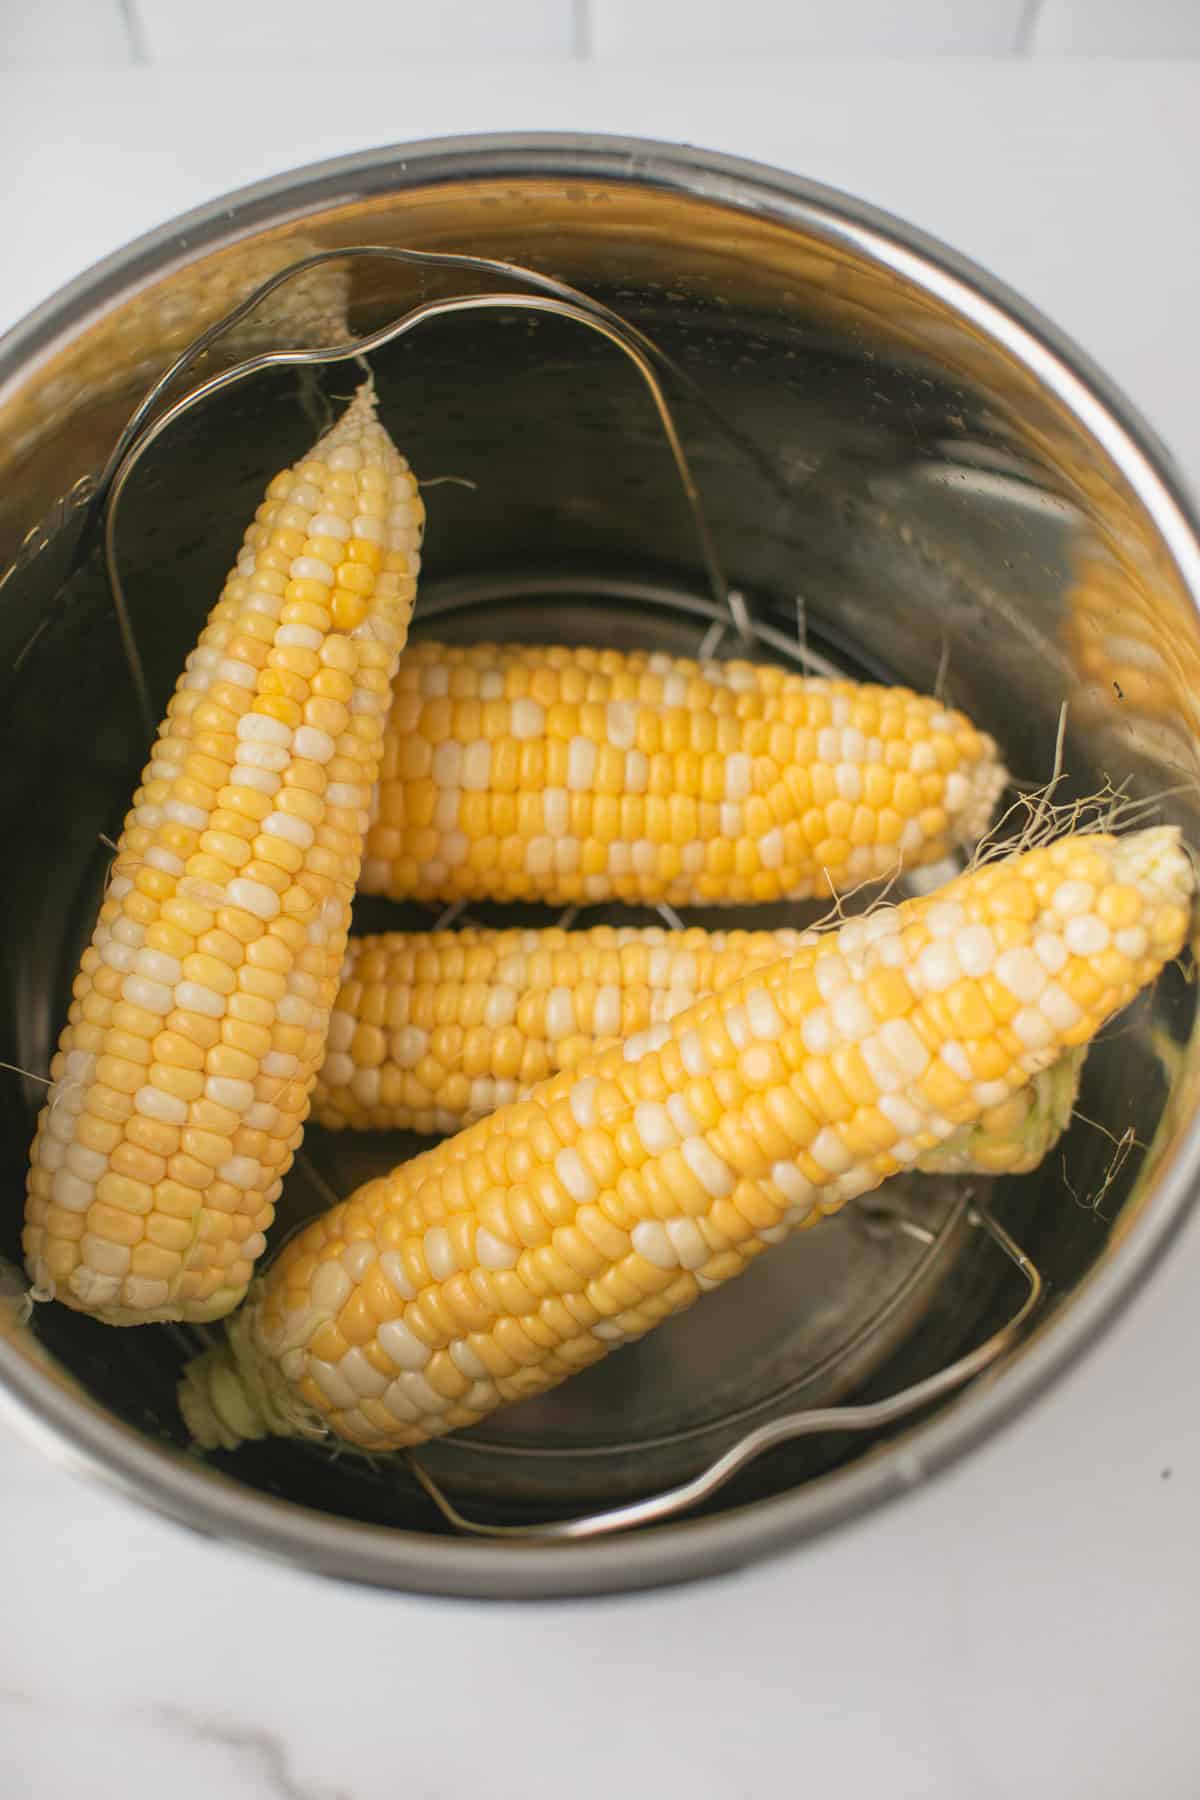 four pieces of corn on the cob inside an instant pot pressure cooker